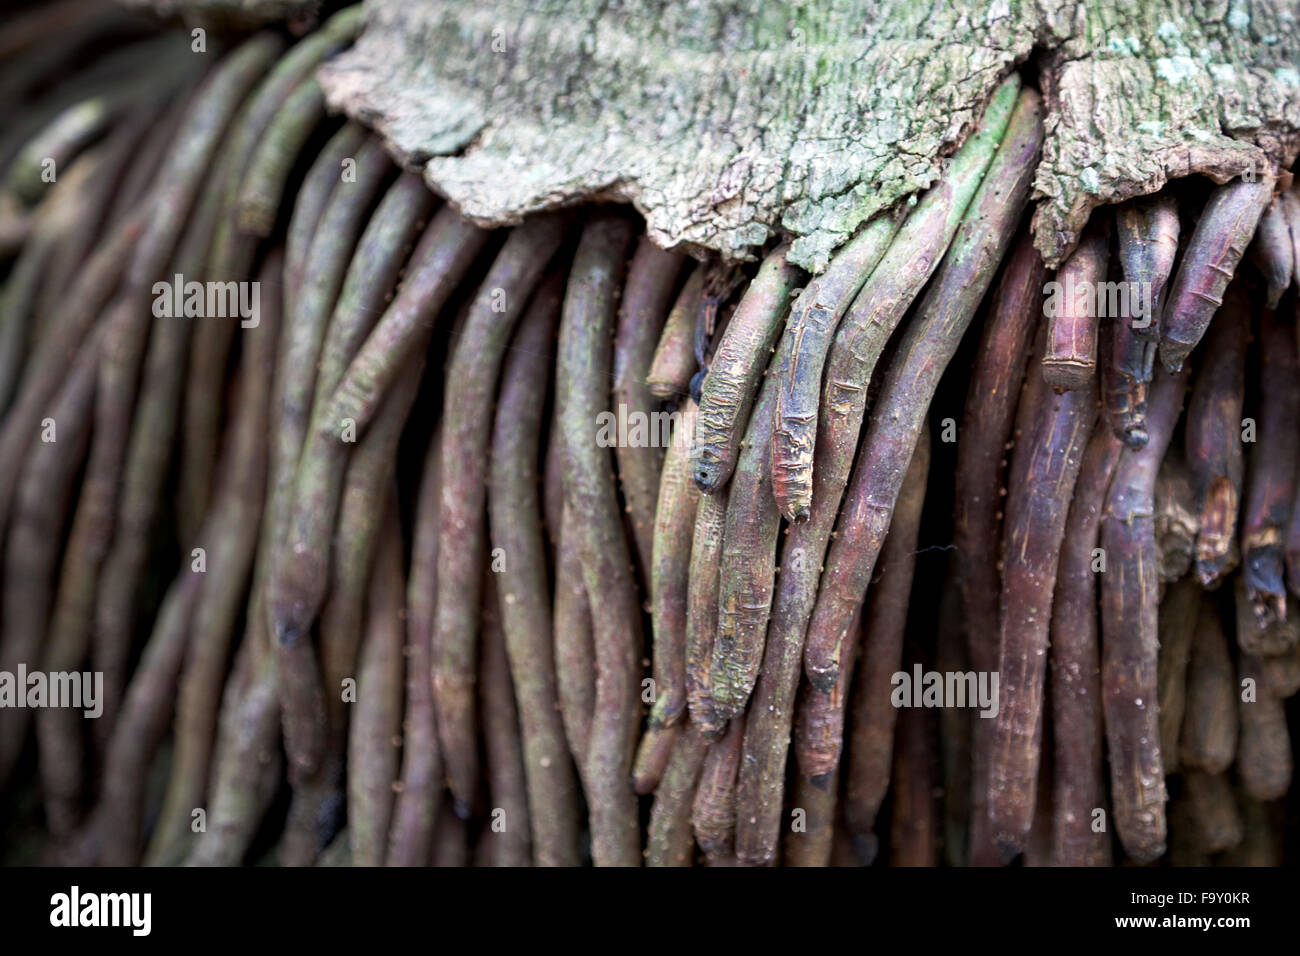 Detail of roots of a palm tree with a fibrous root system, Brazil Stock Photo